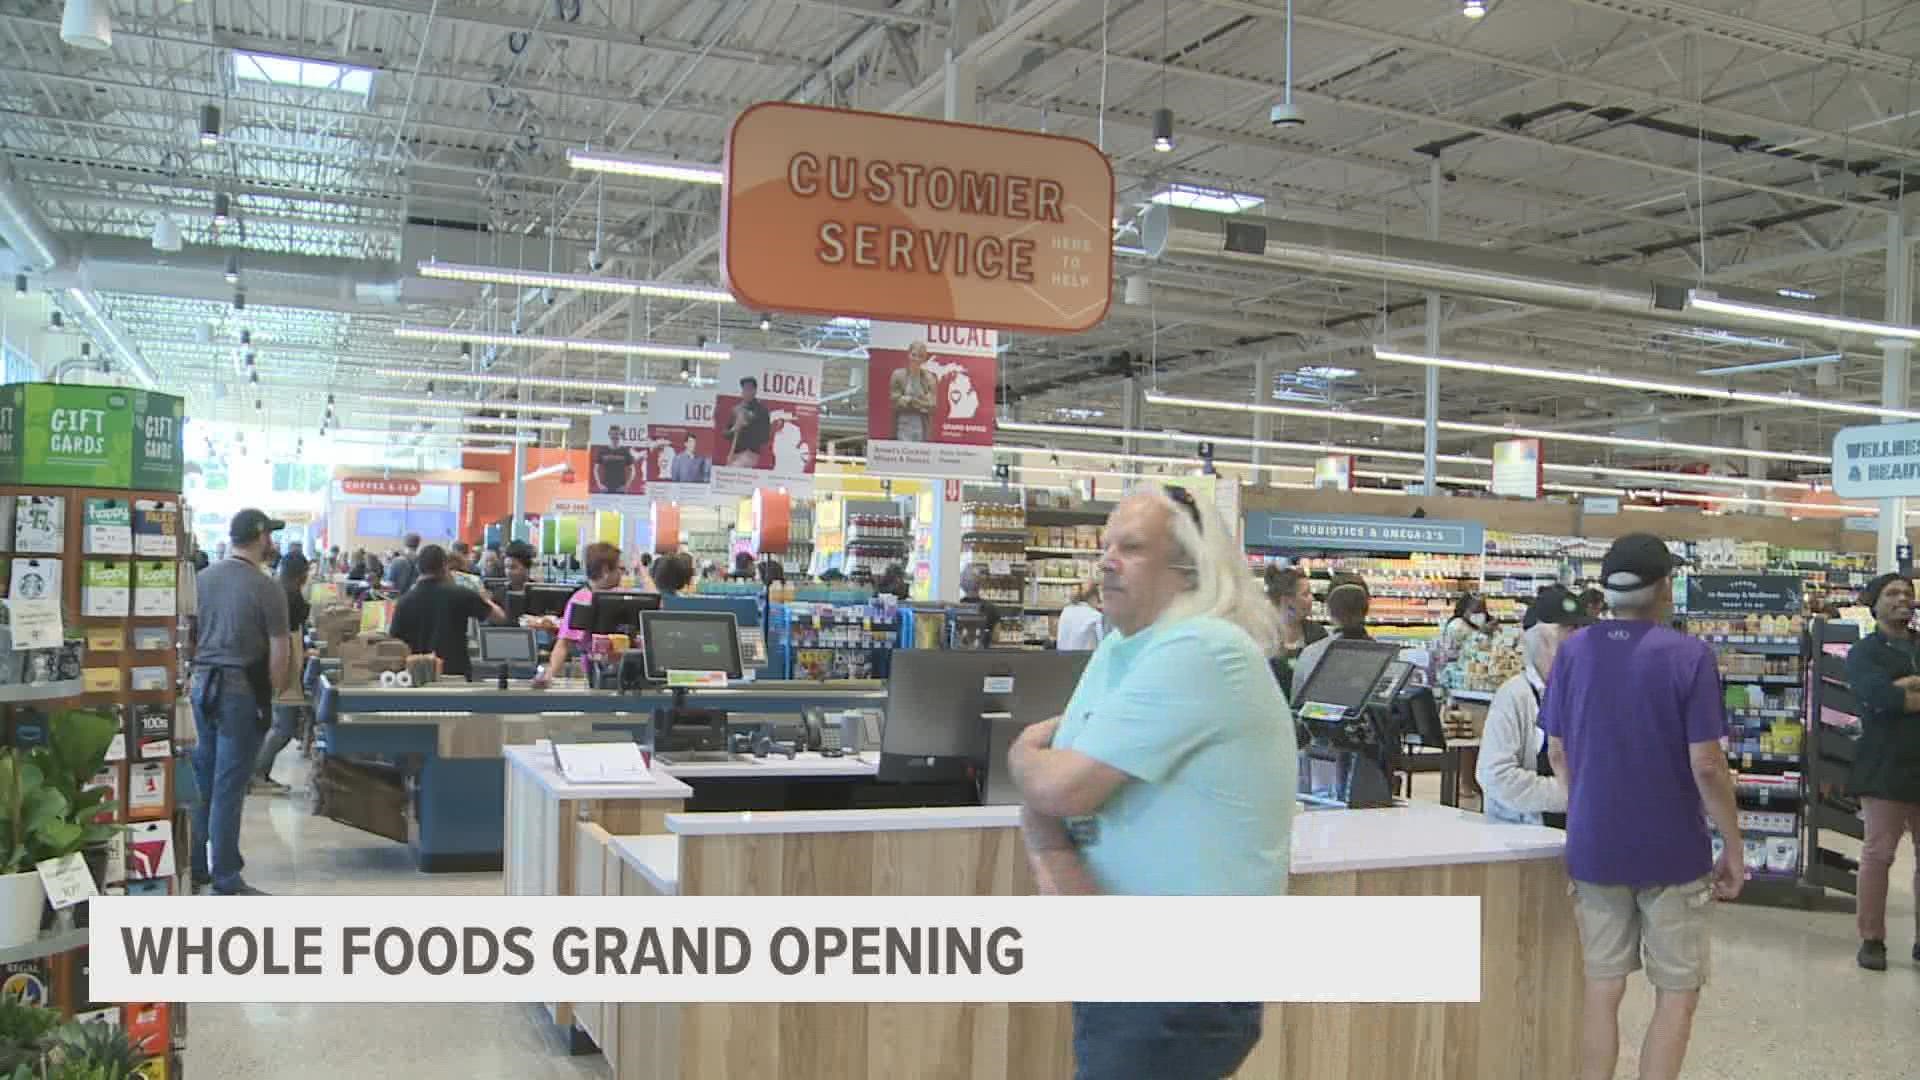 Crowds were lined up as early as 6 a.m. for the 9 a.m. grand opening of West Michigan's first Whole Foods.